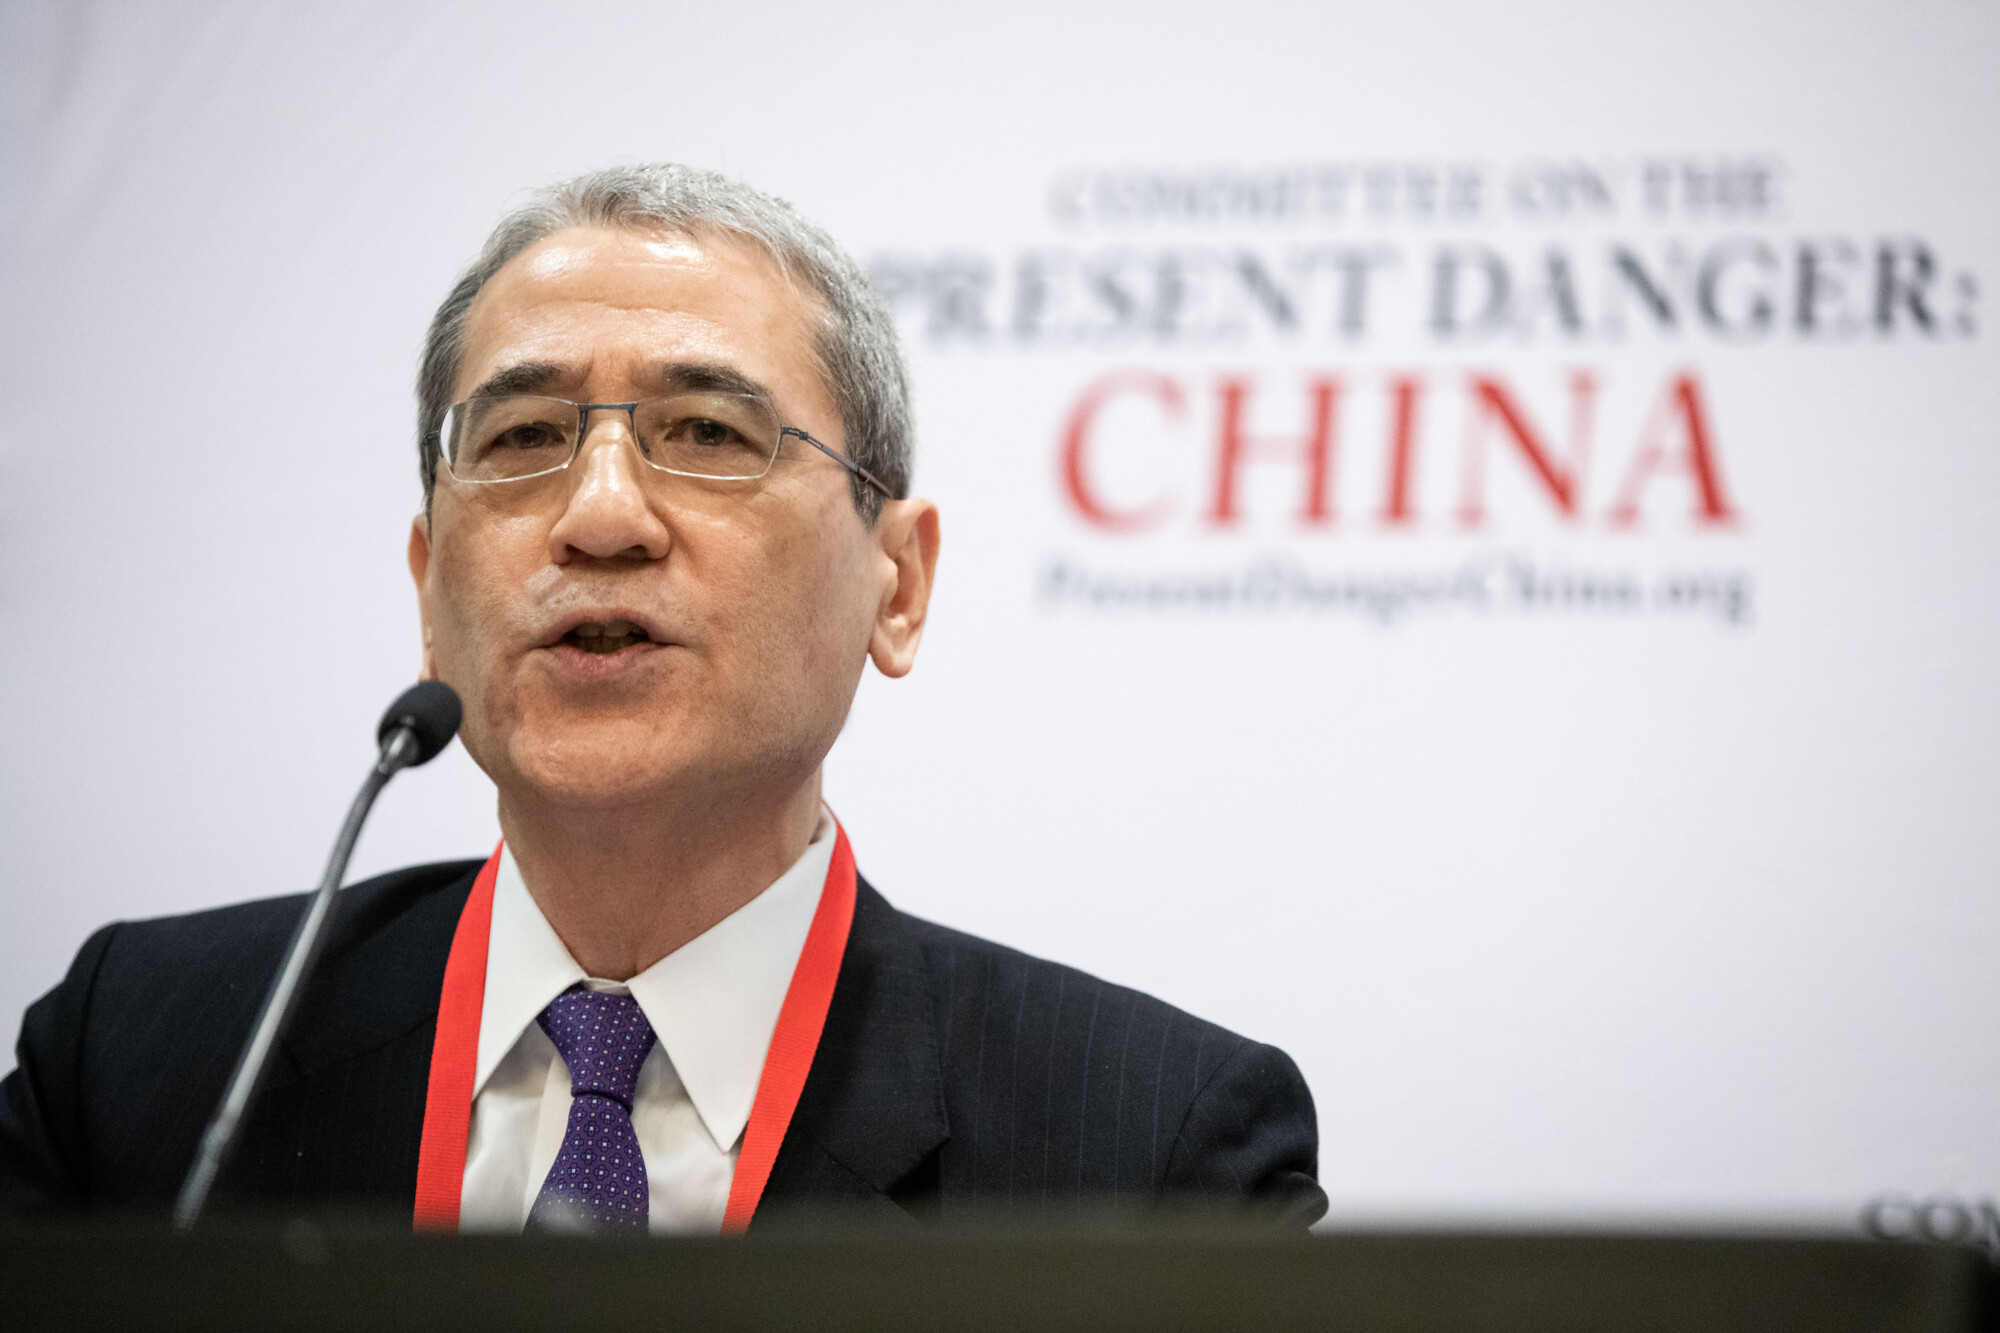 Gordon Chang: Cooperation With Communist China Impossible—It Seeks to Overthrow America